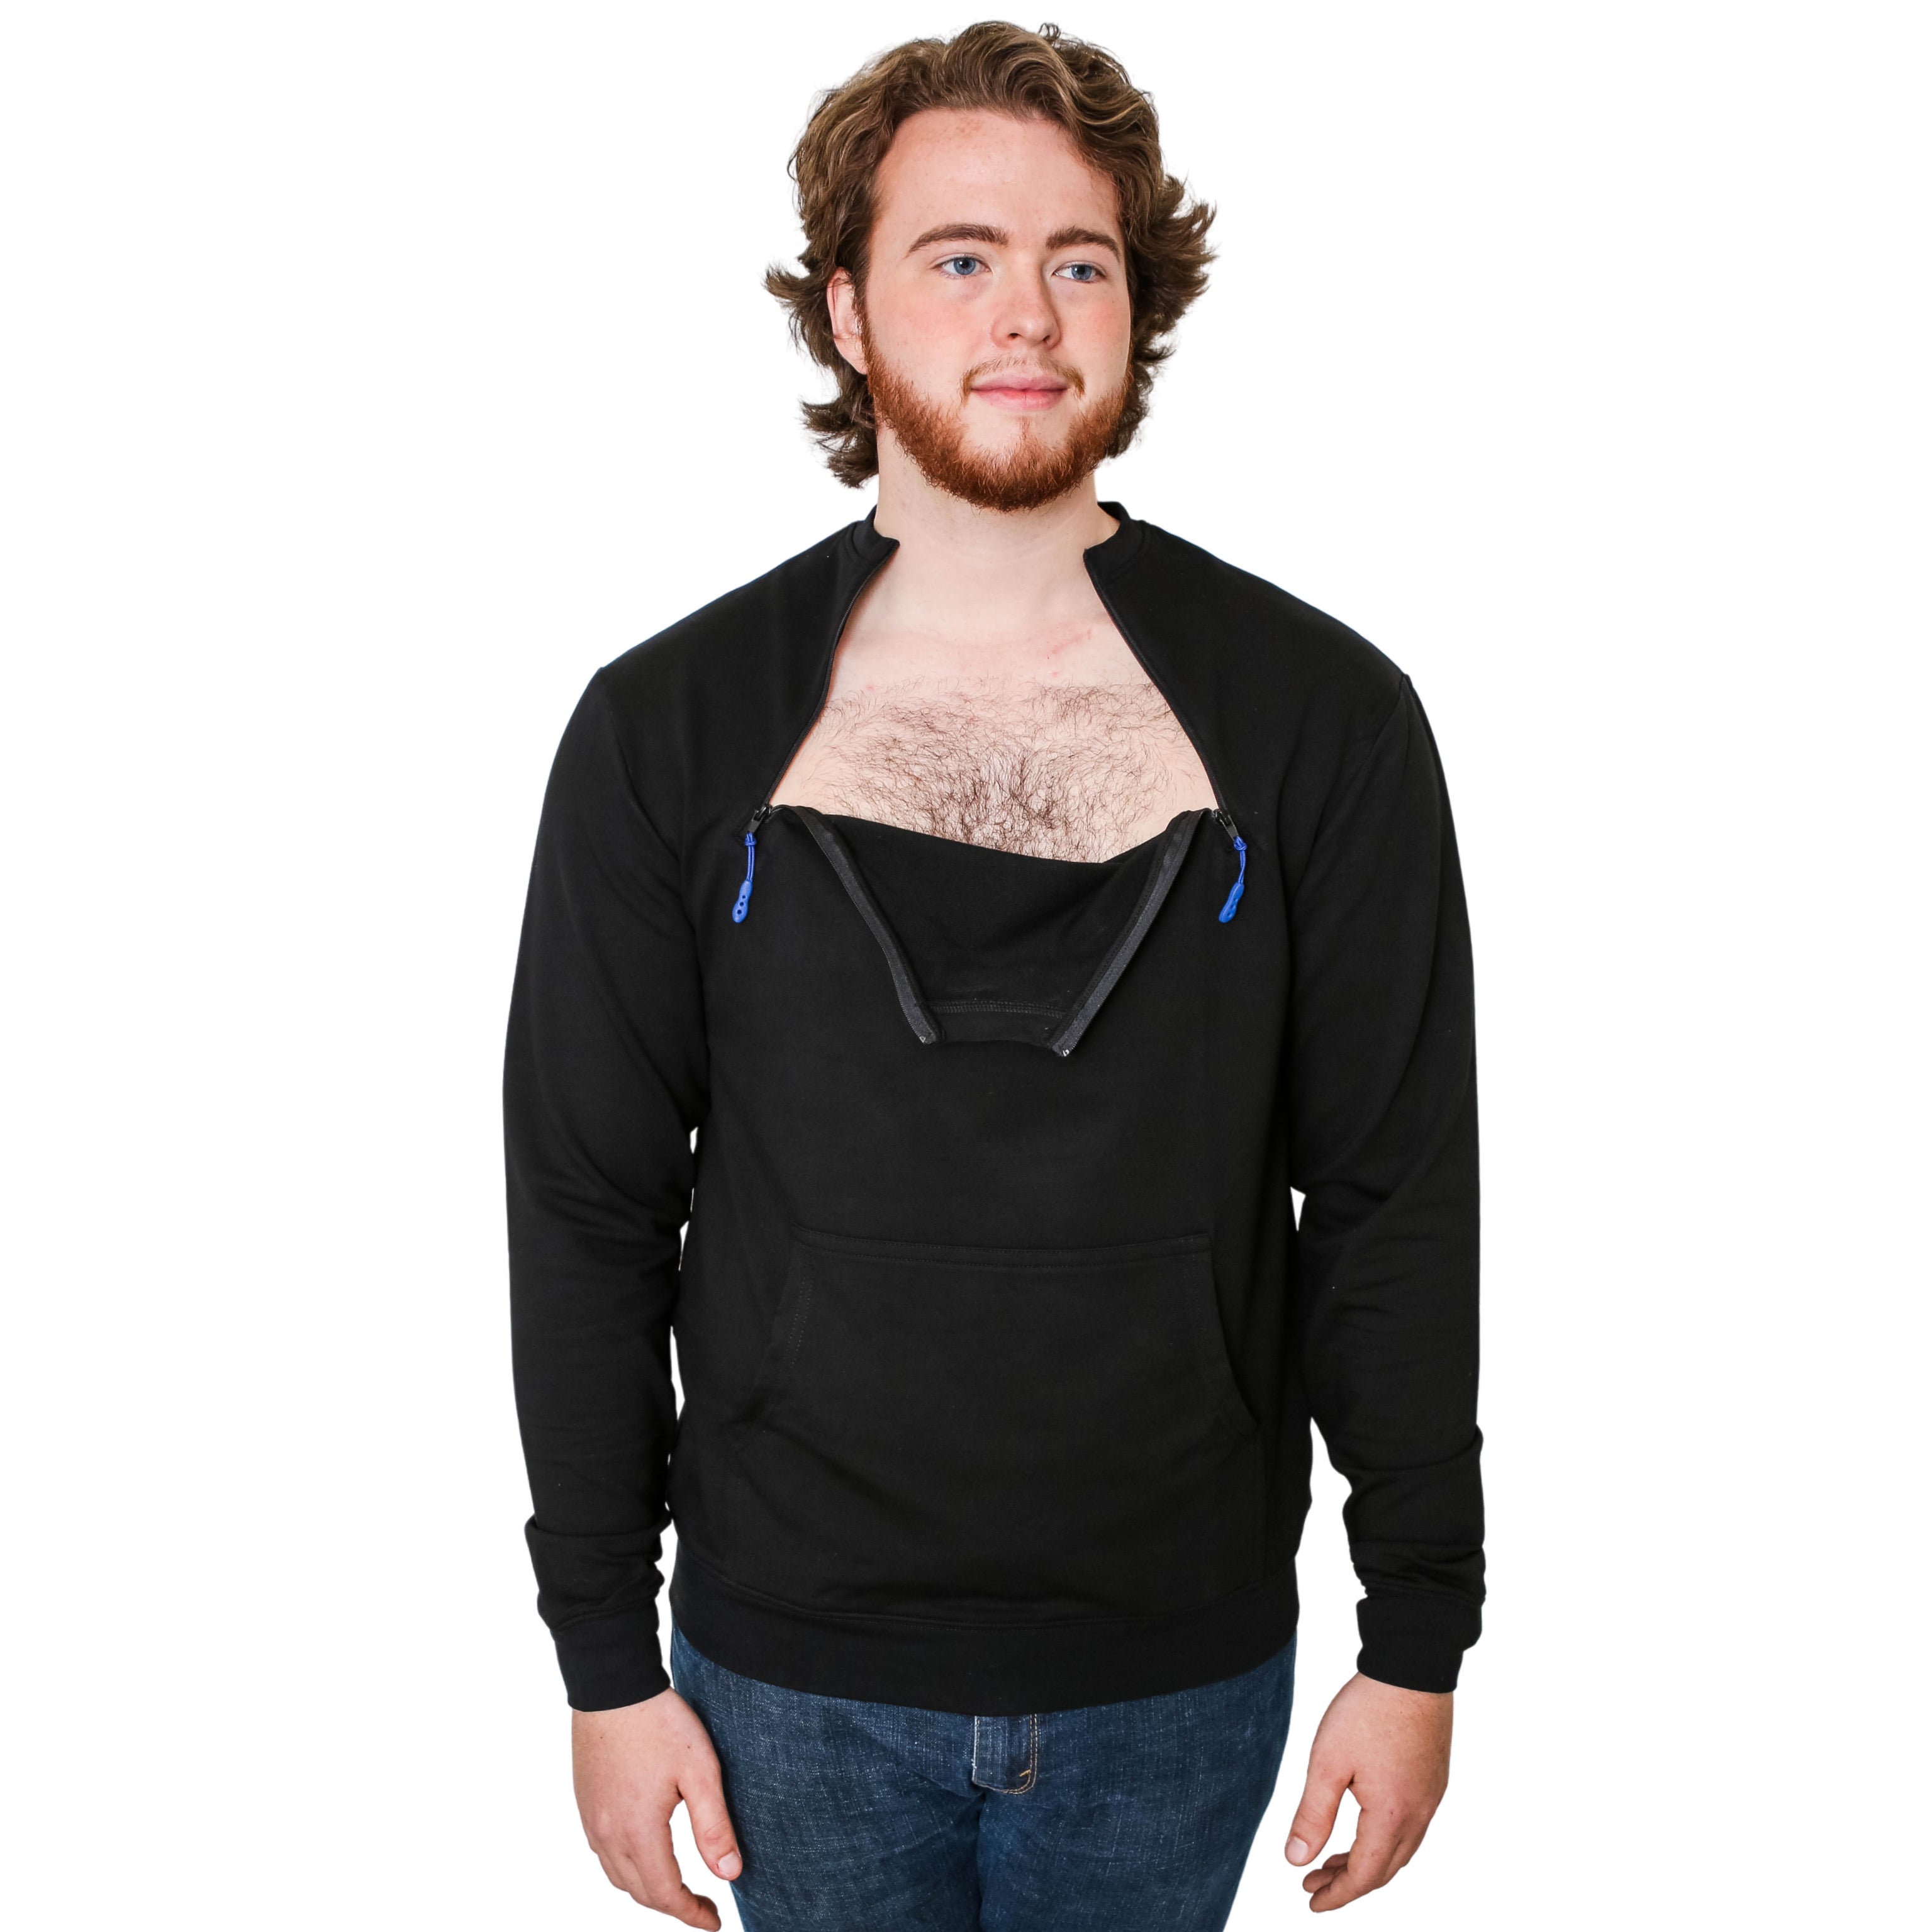 Chest Port Access Thick Warm Unisex Sweater